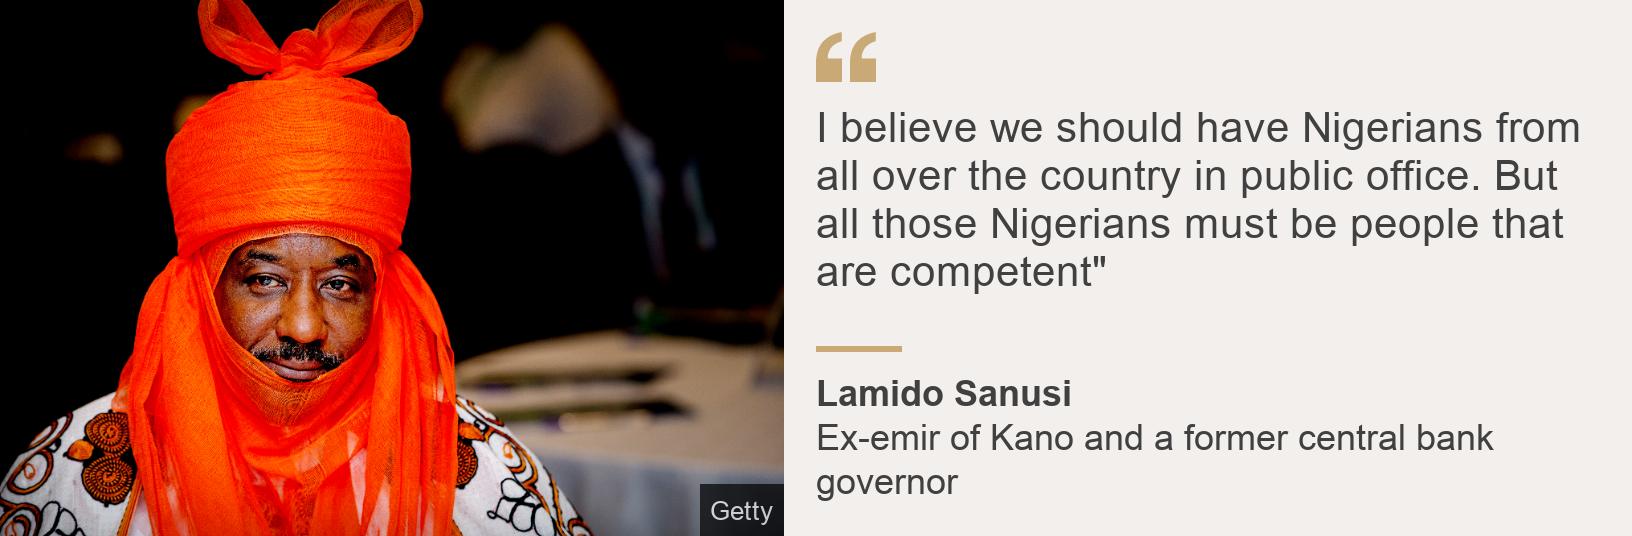 &quot;I believe we should have Nigerians from all over the country in public office. But all those Nigerians must be people that are competent&quot;&quot;, Source:  Lamido Sanusi, Source description: Ex-emir of Kano and a former central bank governor, Image: 